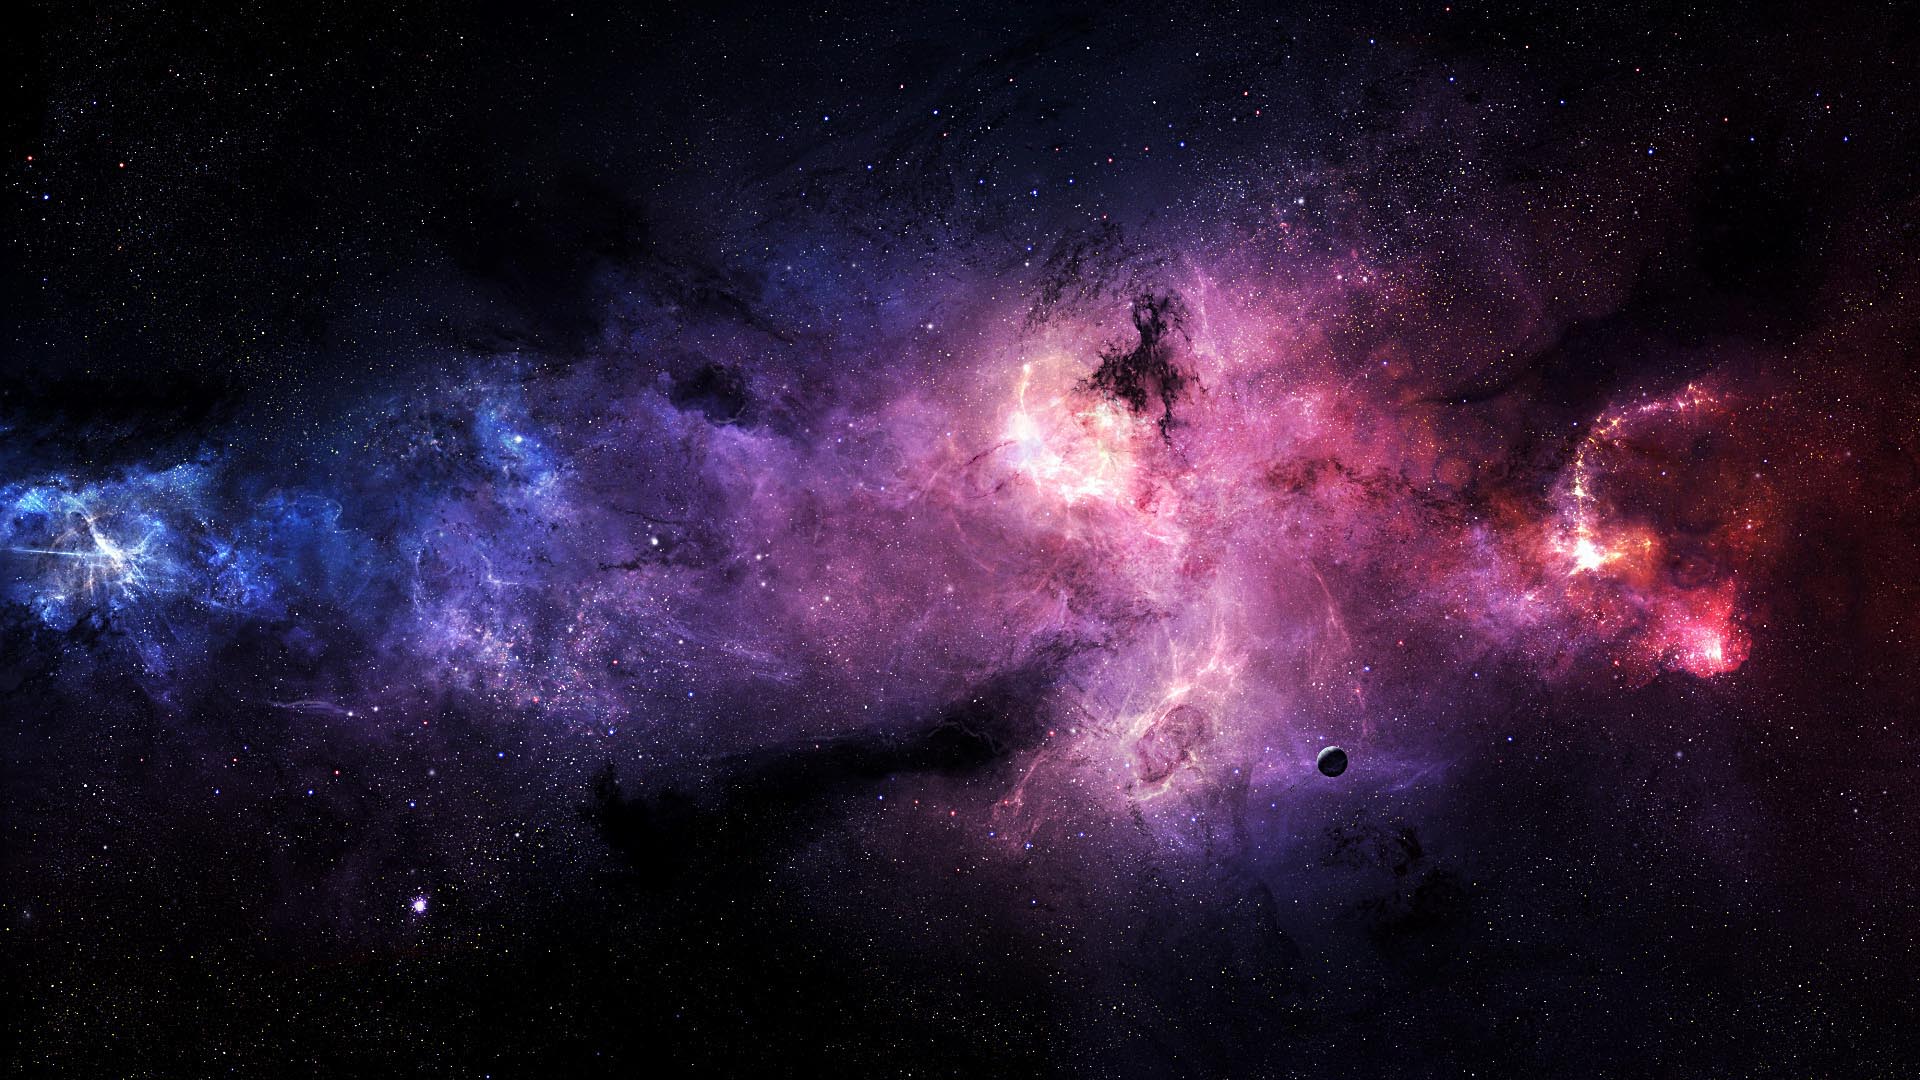 Wallpaper For > Blue And Purple Galaxy Wallpaper